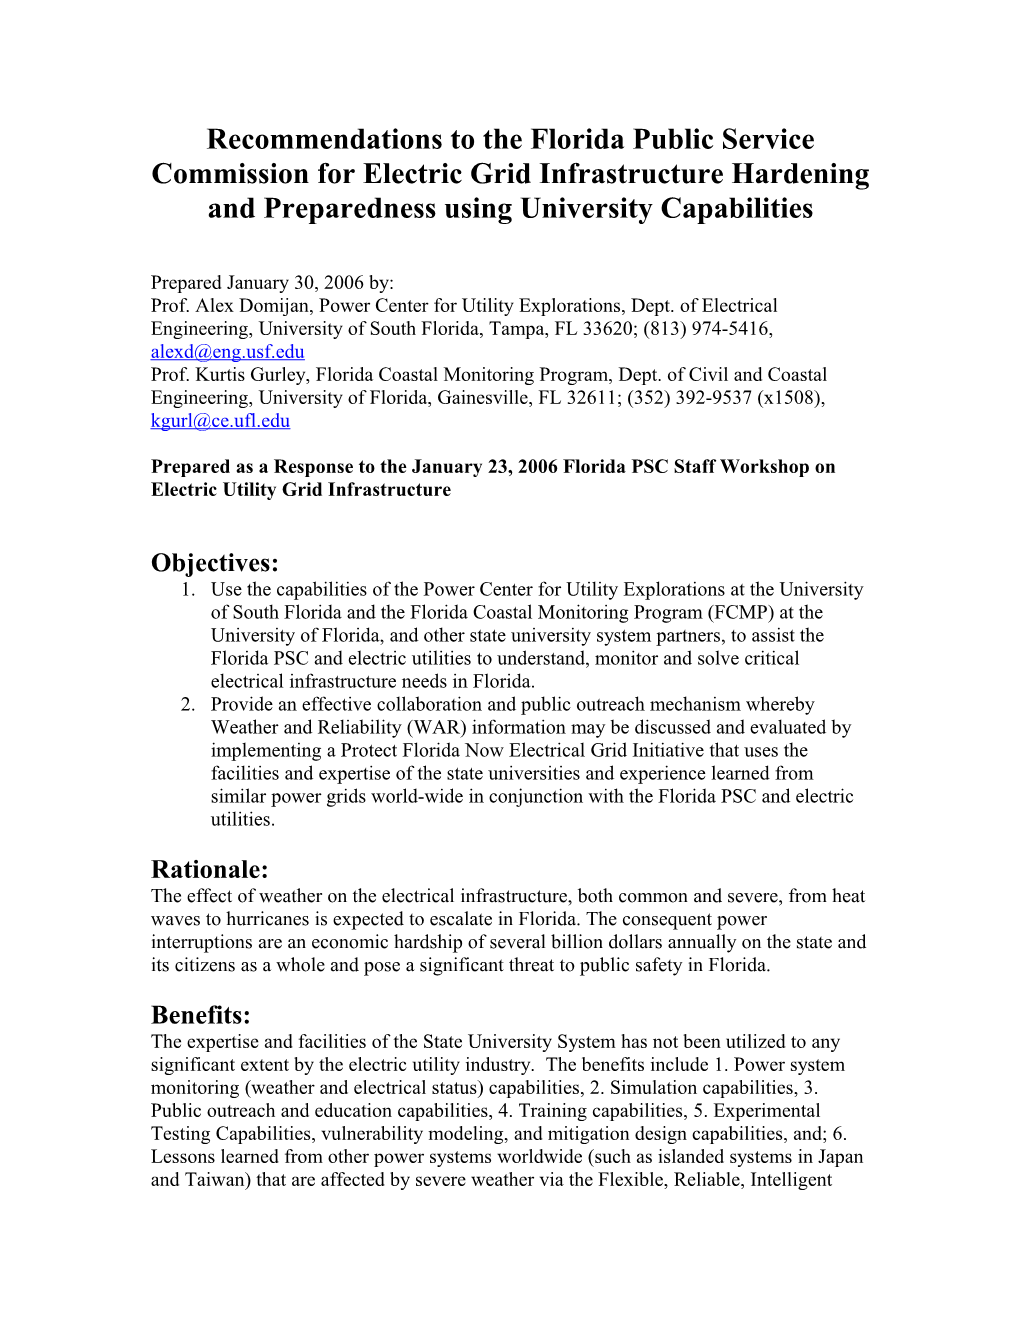 Recommendations for Electric Grid Infrastructure Hardening and Preparedness Using University